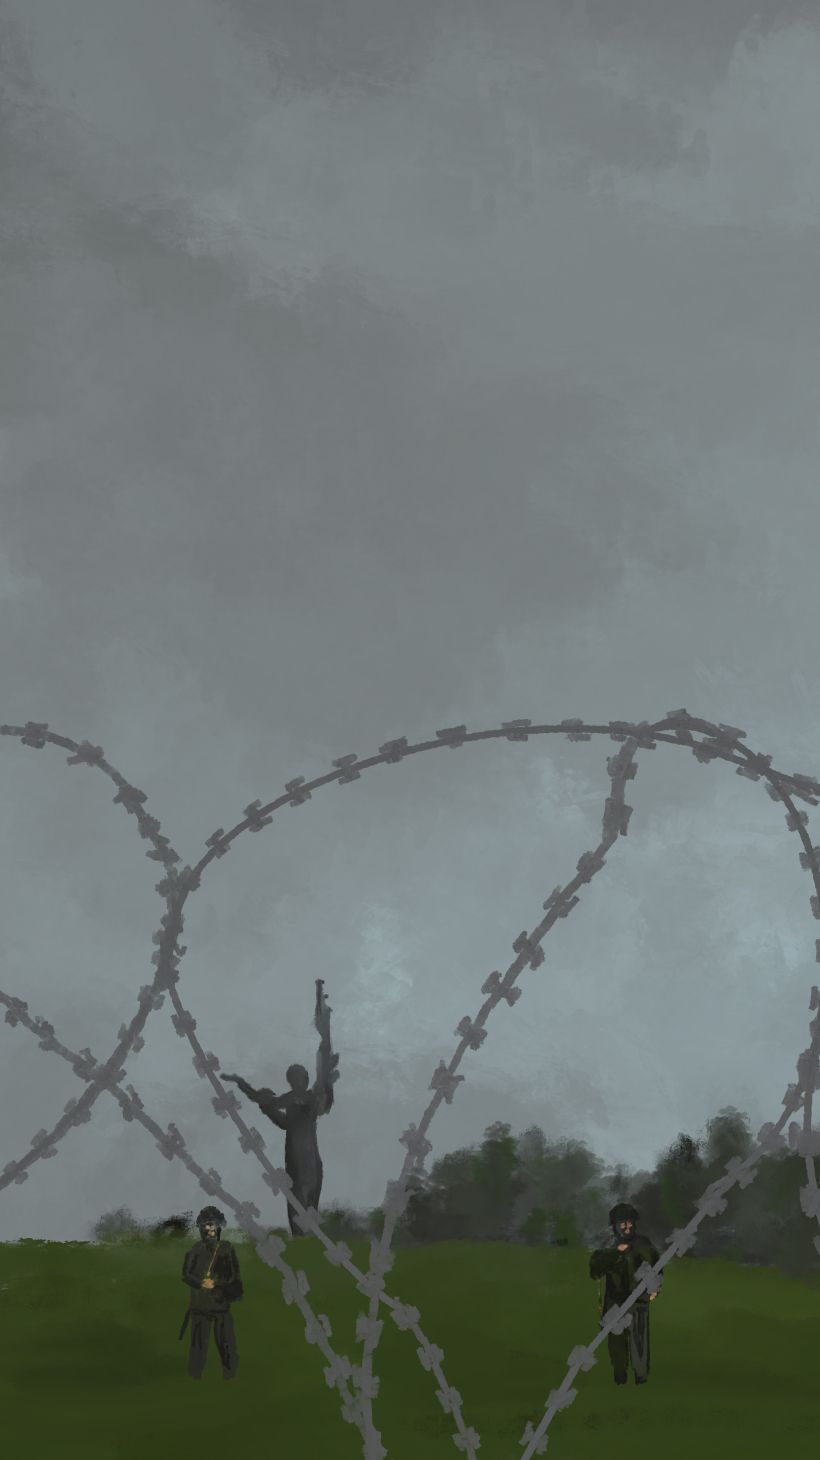 An illustration of barbed wire with 5 soldiers on the other side.